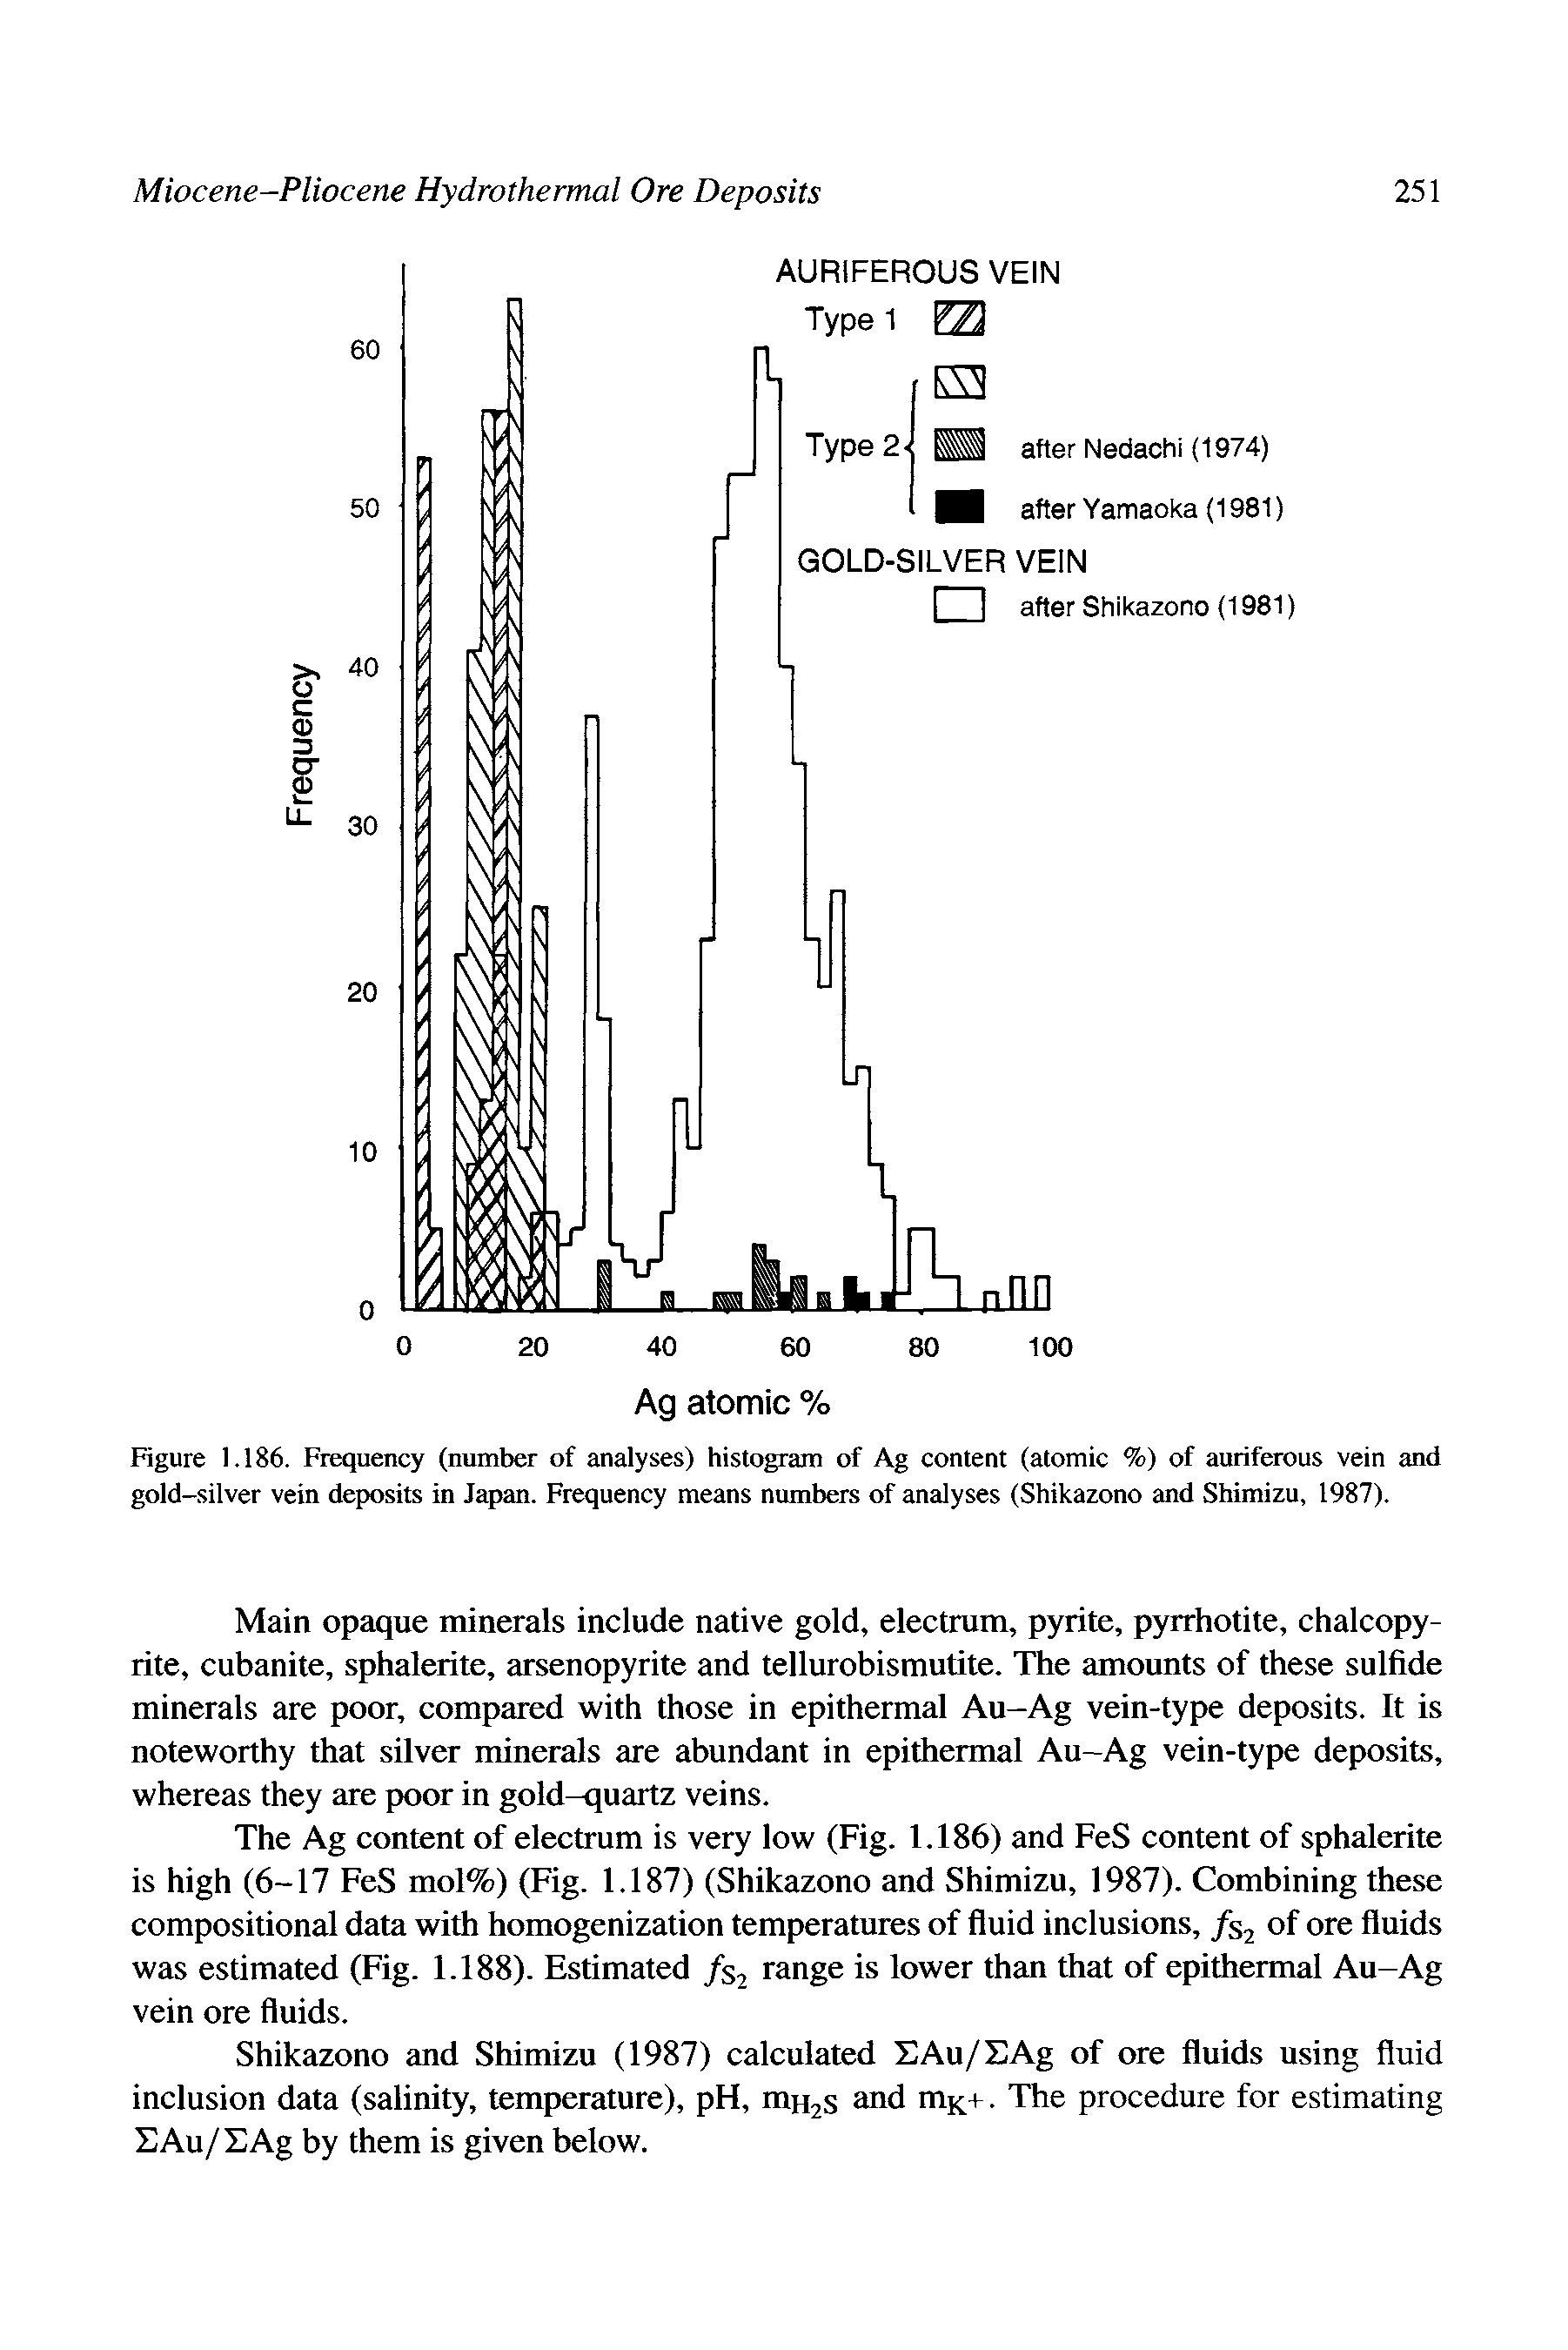 Figure 1.186. Frequency (number of analyses) histogram of Ag content (atomic %) of auriferous vein and gold-silver vein deposits in Japan. Frequency means numbers of analyses (Shikazono and Shimizu, 1987).